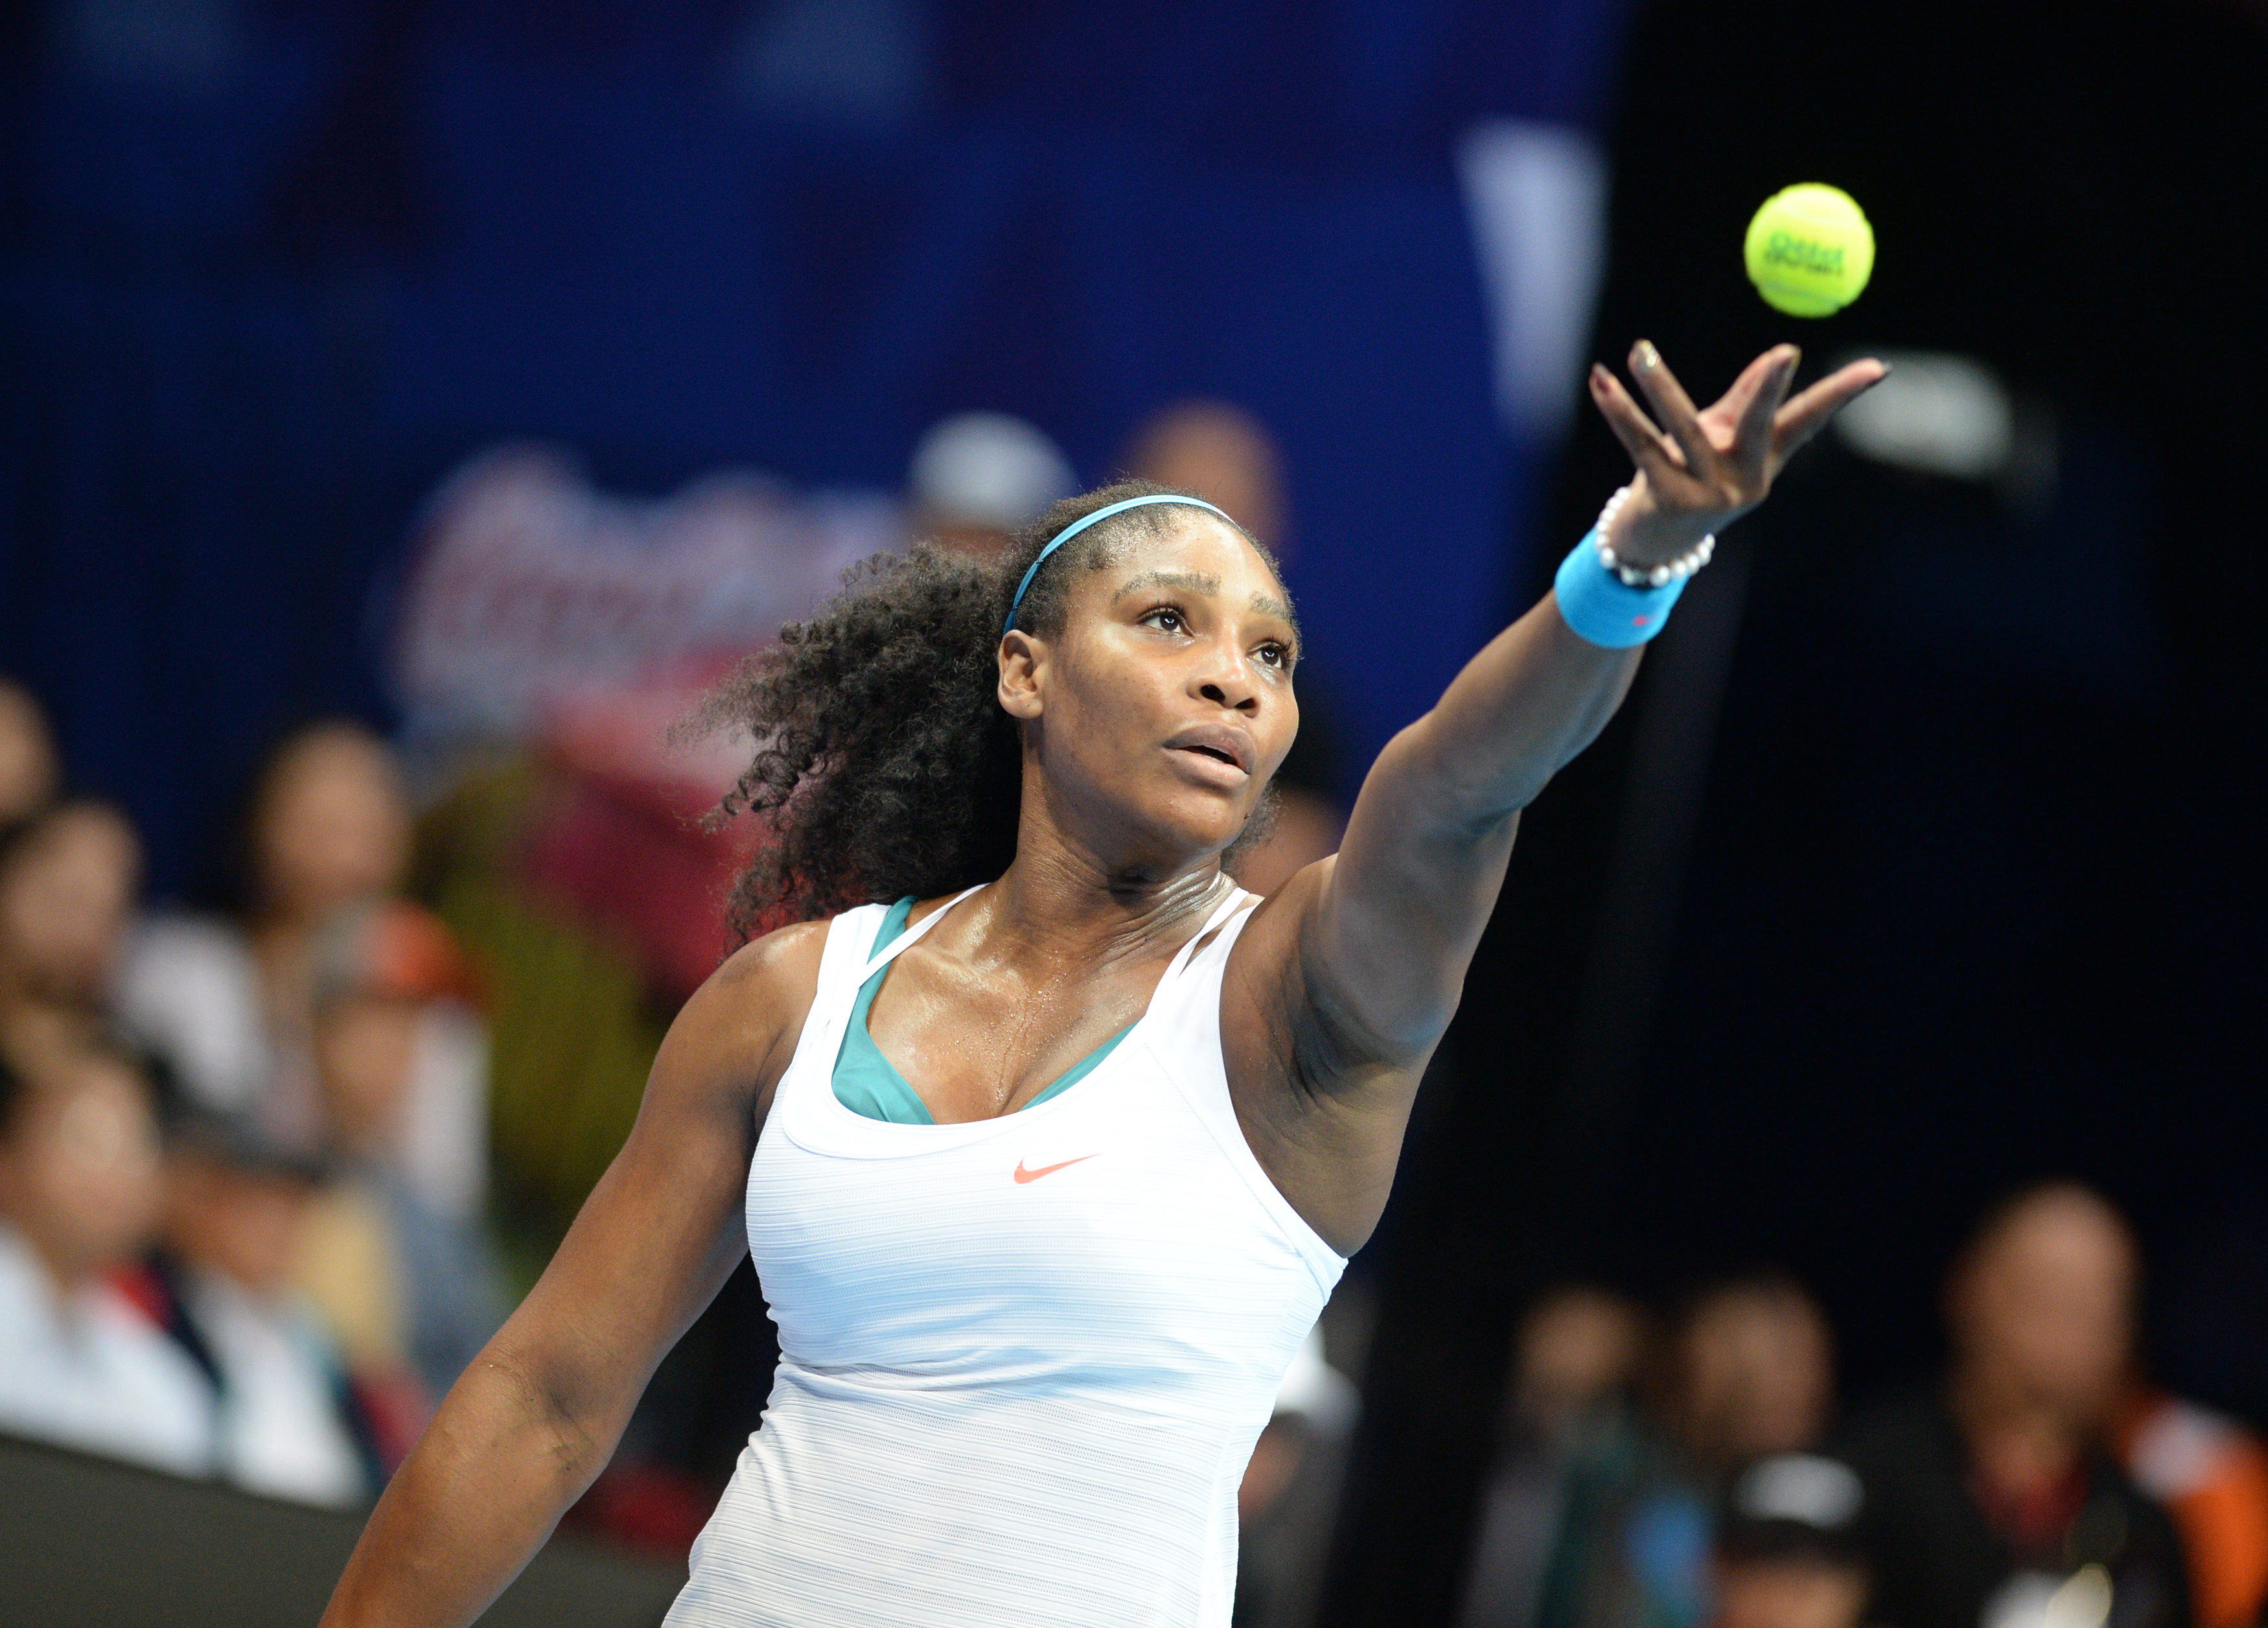 US tennis player Serena Williams  of the Philippine Mavericks serves against Australias Samantha Stosur of the Indian Aces in the women's singles of the International Premier Tennis League (IPTL) competition in Manila on December 8, 2015. Williams won 6-3.     AFP PHOTO / TED ALJIBE / AFP / TED ALJIBE        (Photo credit should read TED ALJIBE/AFP/Getty Images) (Ted Aljibe&mdash;AFP/Getty Images)